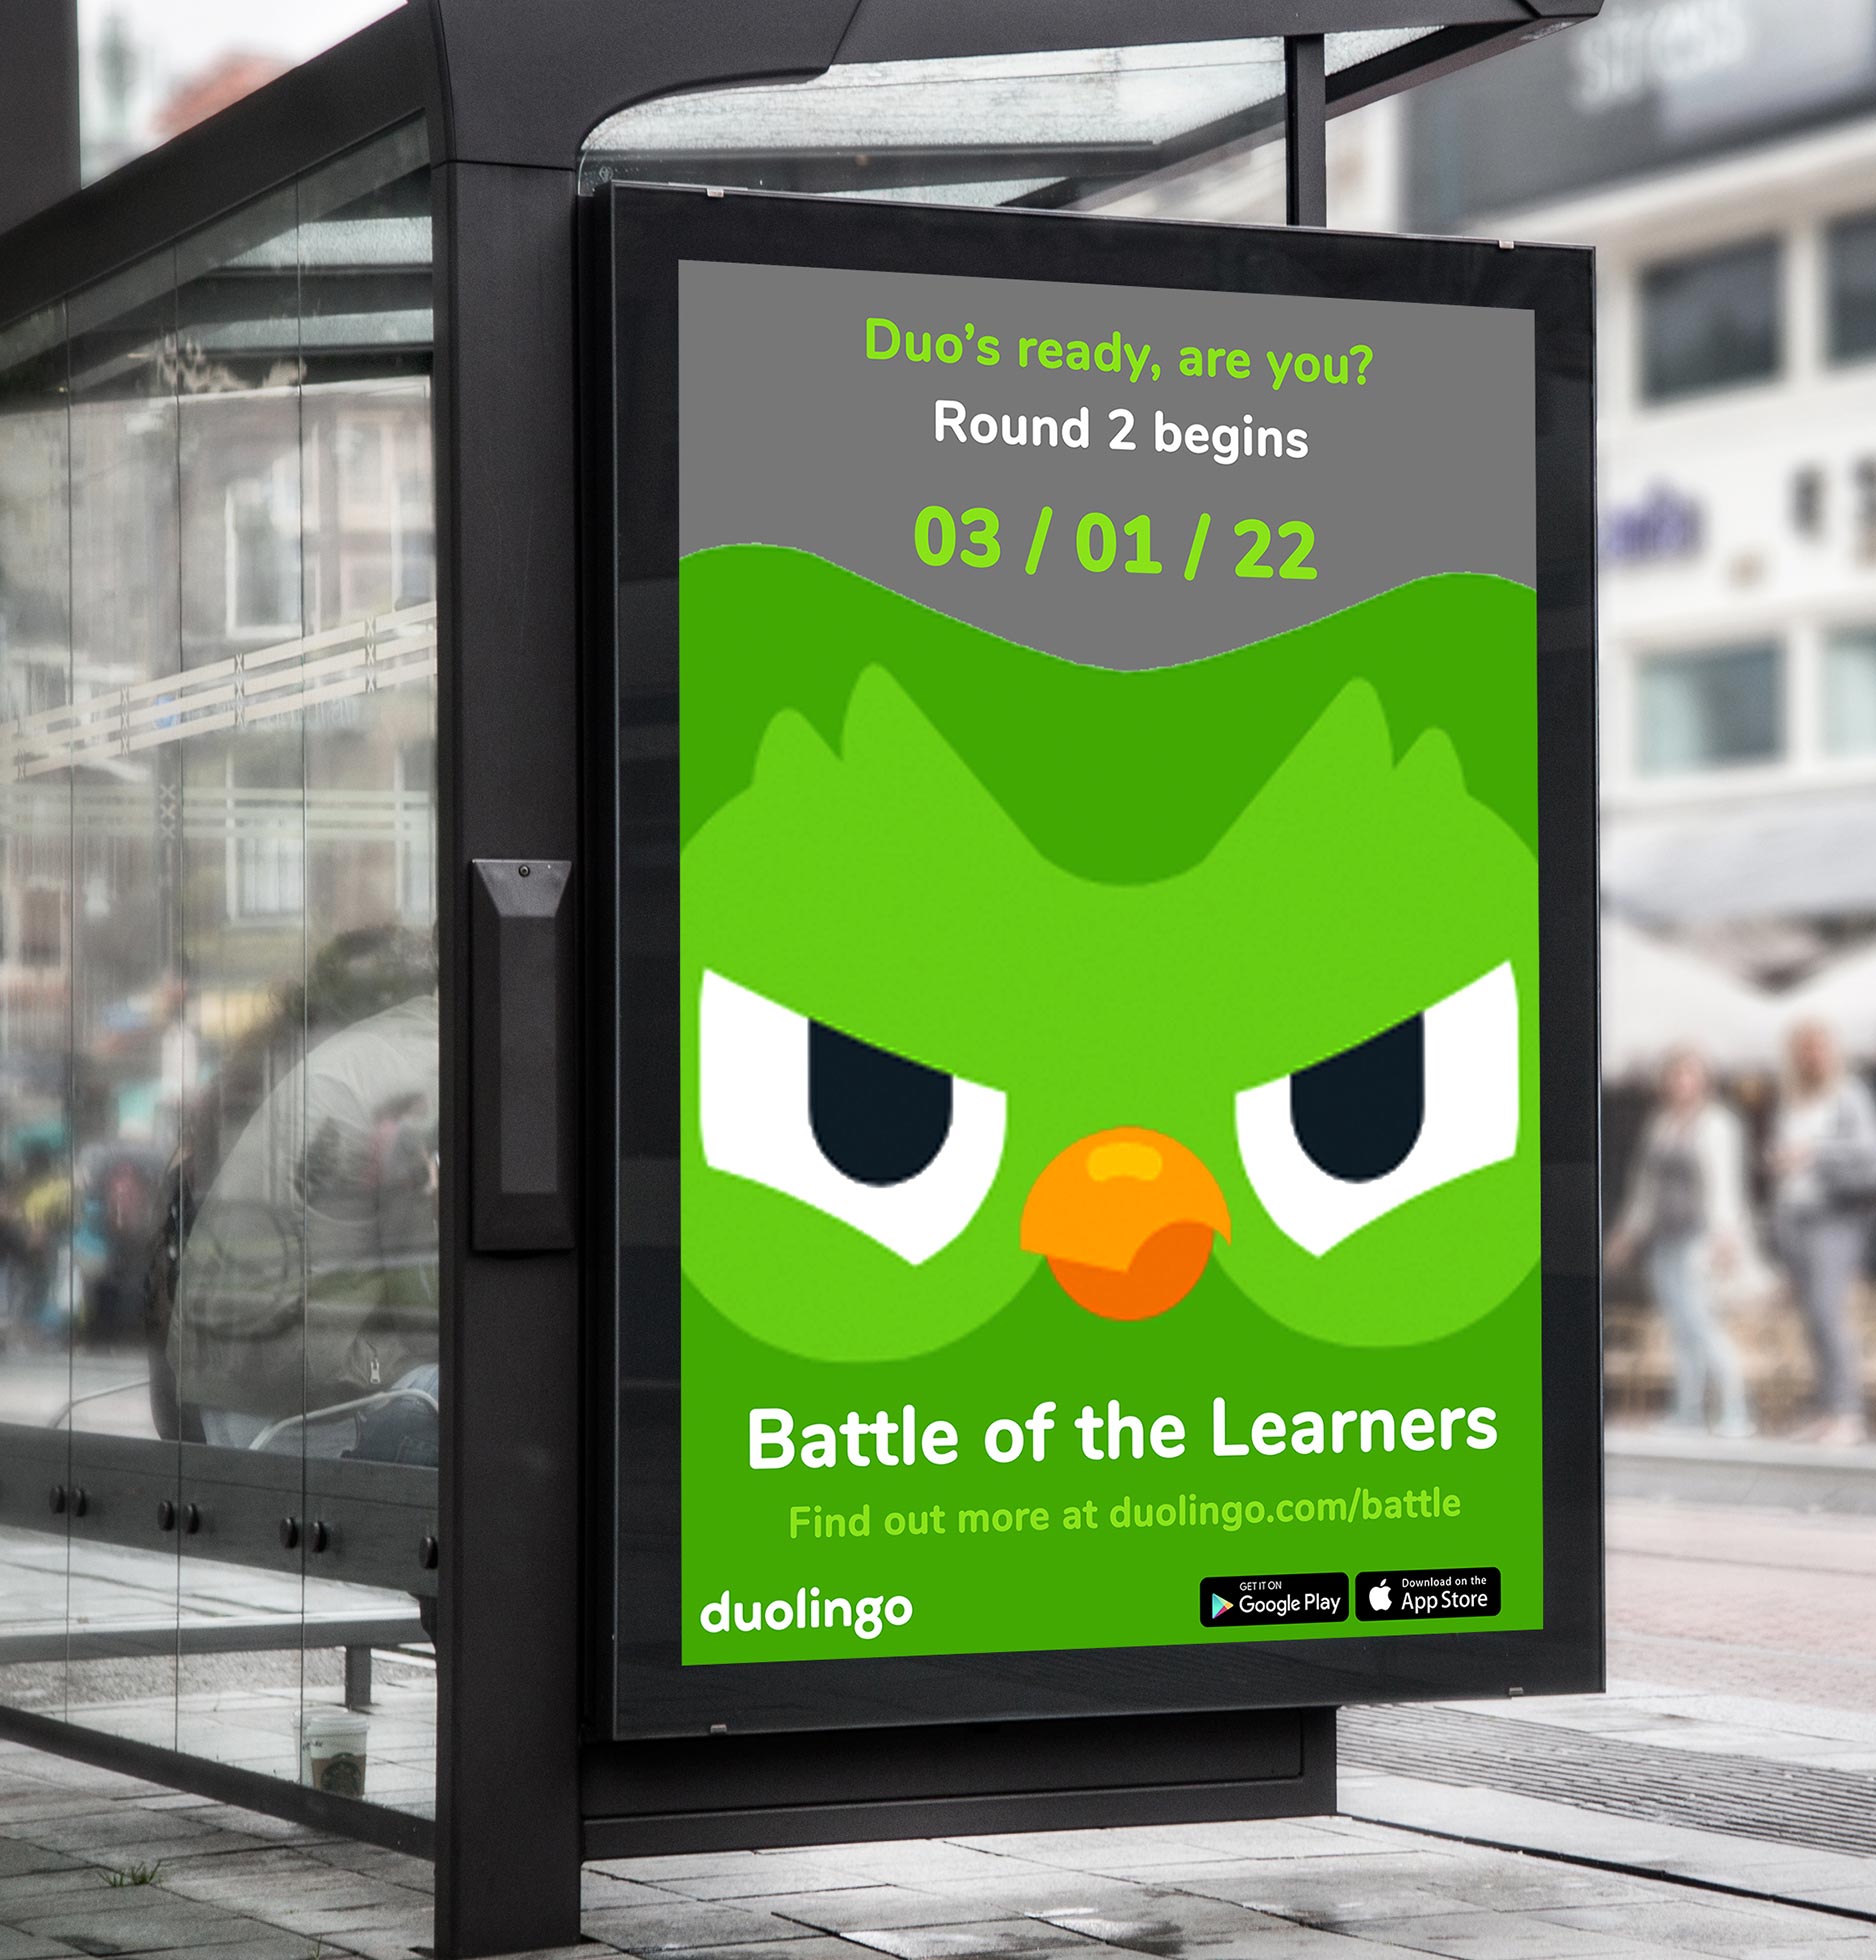 A bus stop poster that promotes the 'Battle of the Learners' campaign